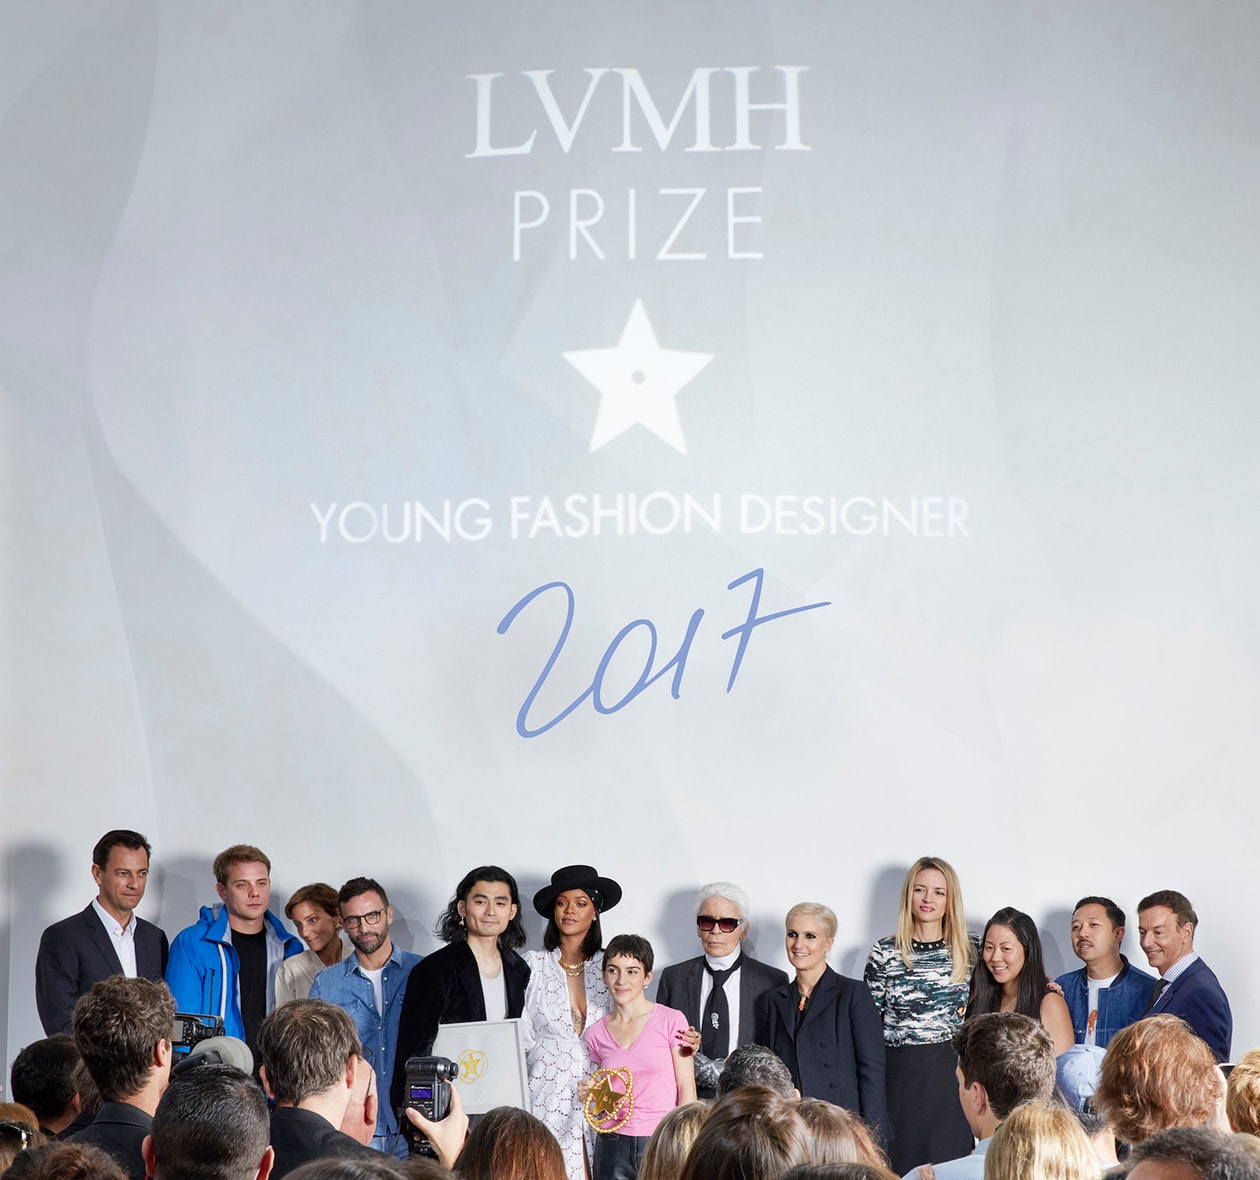 LVMH Prize for Young Fashion Designers 2017 Winner Marine Serre